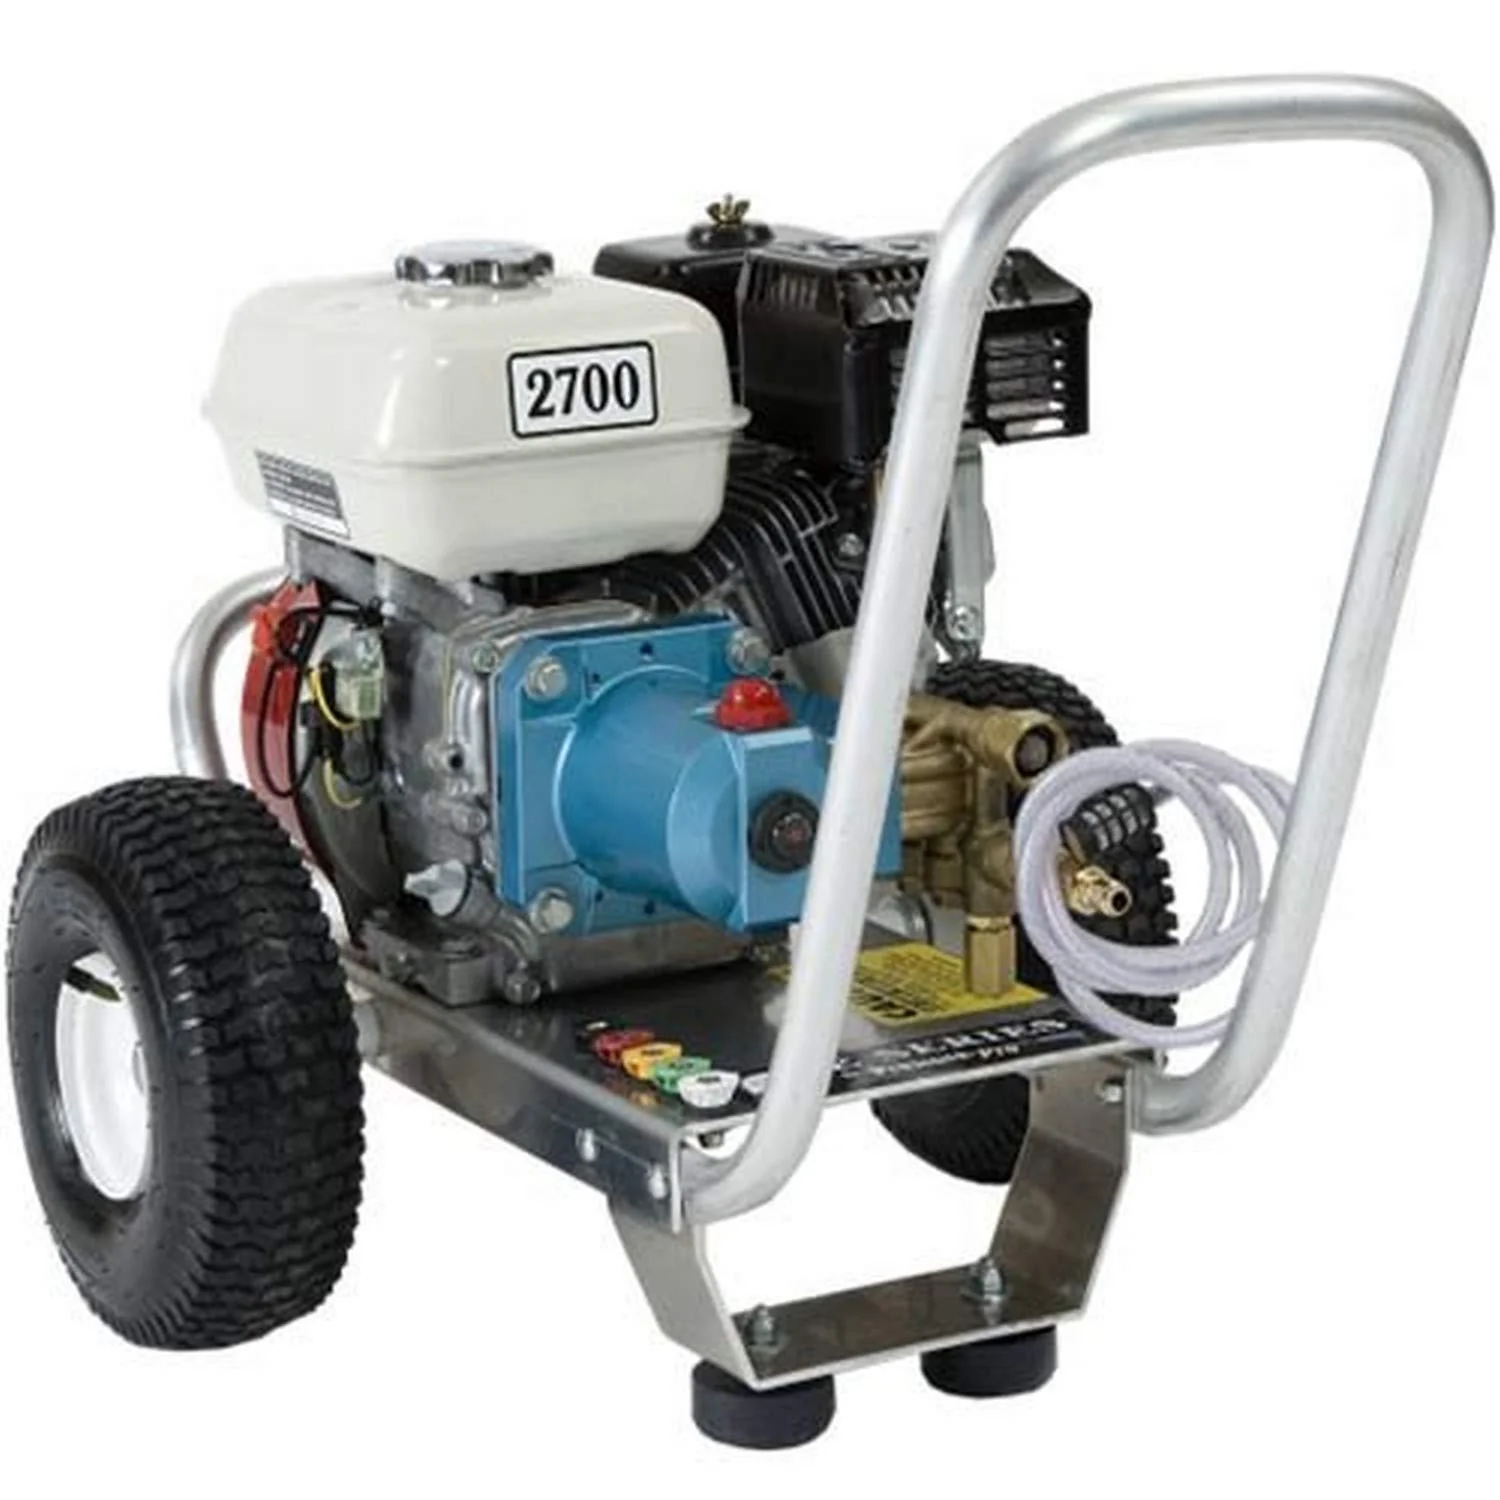 Featured image for “Pressure Washer Cold 2700psi”